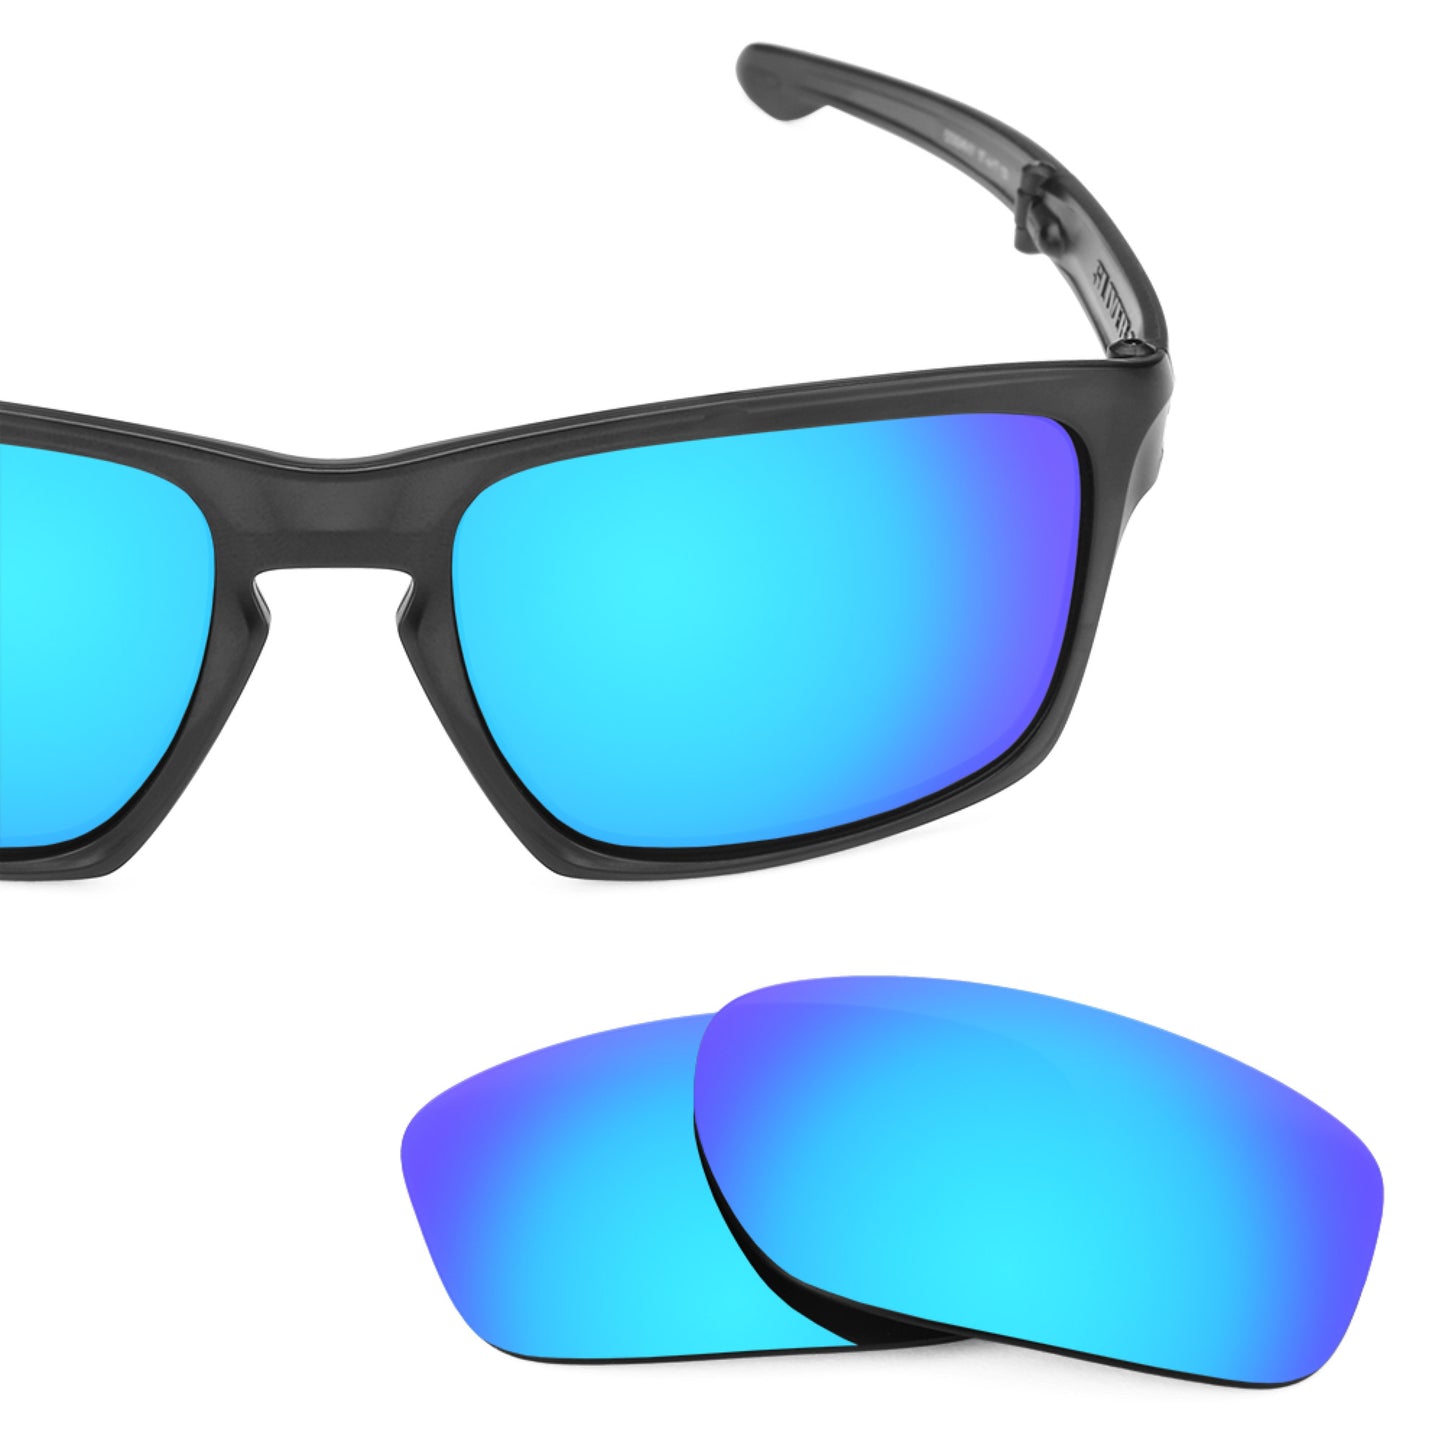 Revant replacement lenses for Oakley Sliver F Polarized Ice Blue